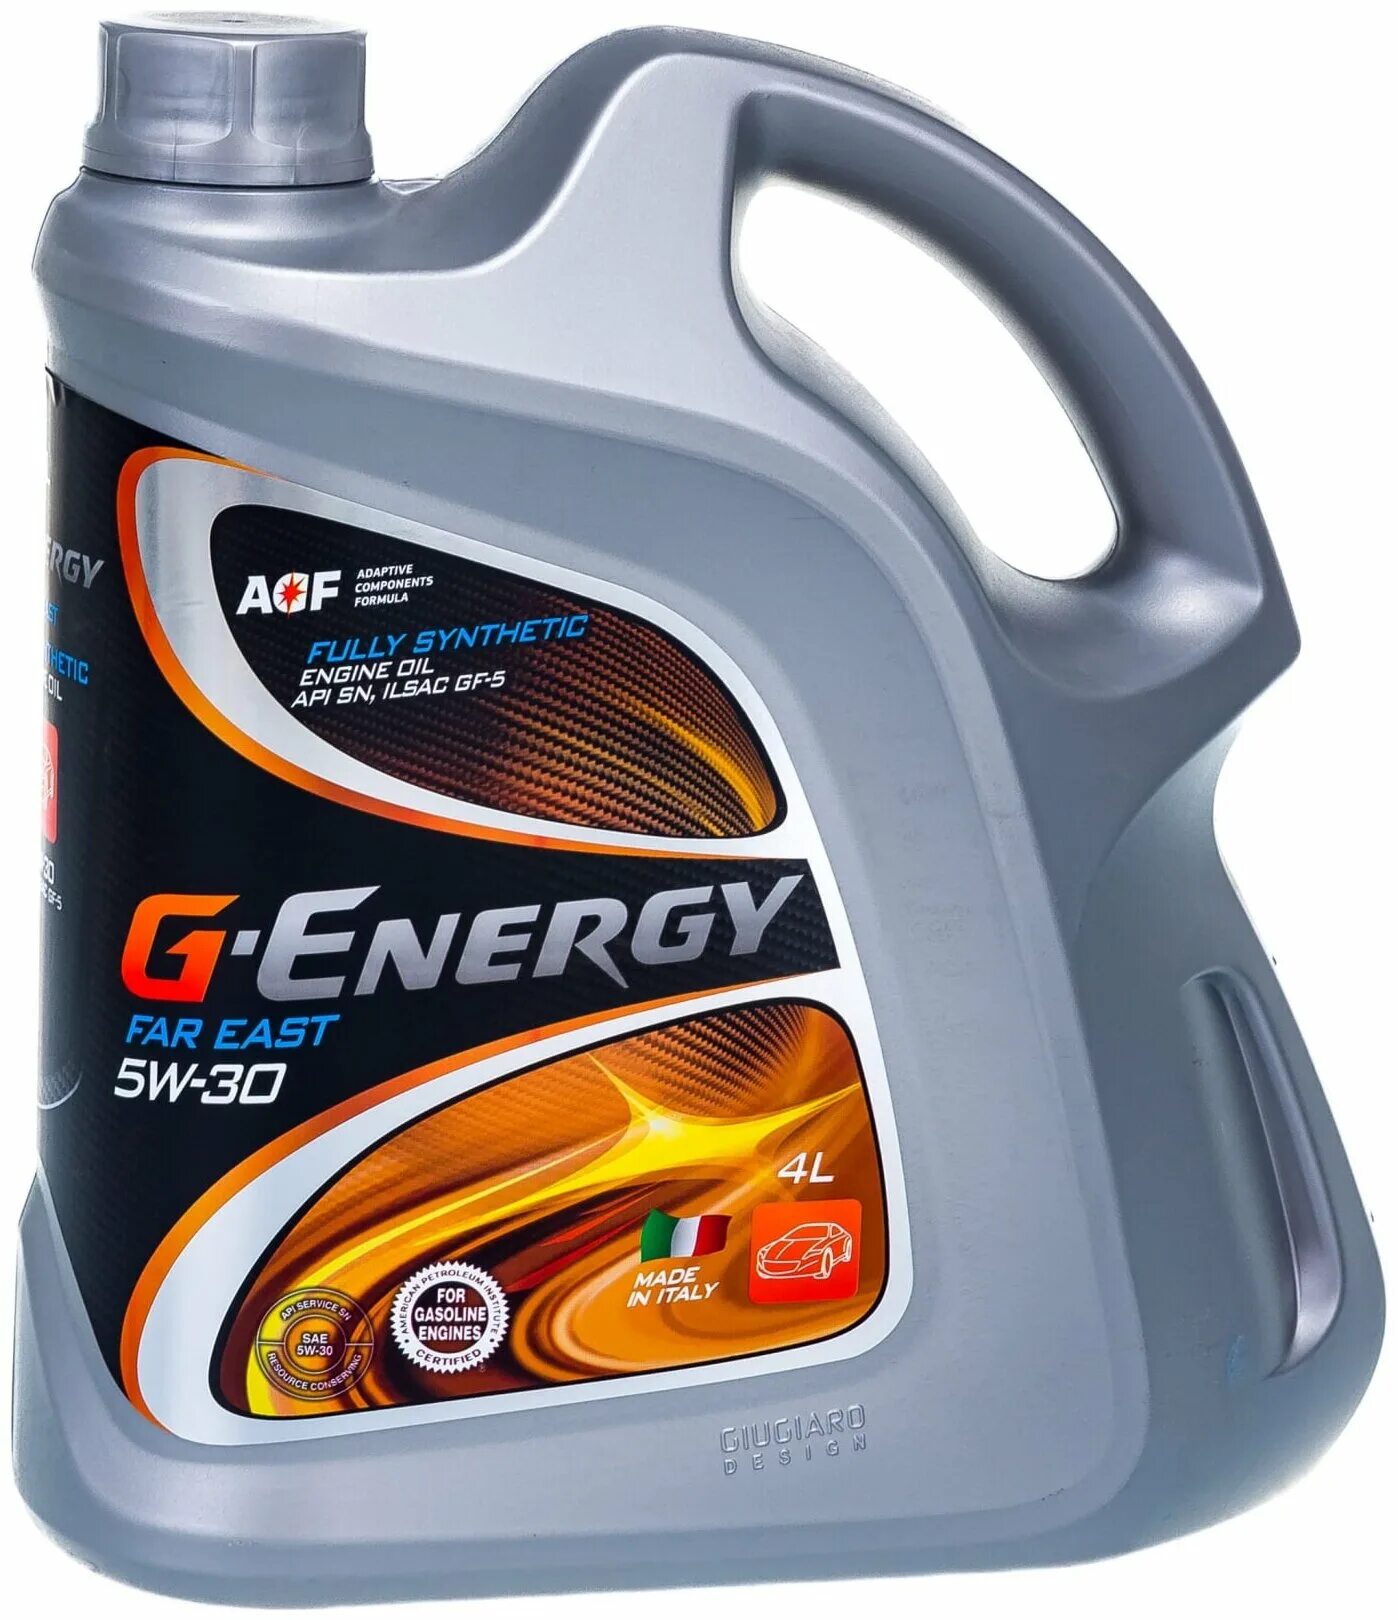 G-Energy Expert l 5w-40. G-Energy Synthetic far East 5w-30 4л. G Energy 5w30 gf-5. Джи Энерджи 5w40 синтетика. Масло g energy synthetic 5w 30